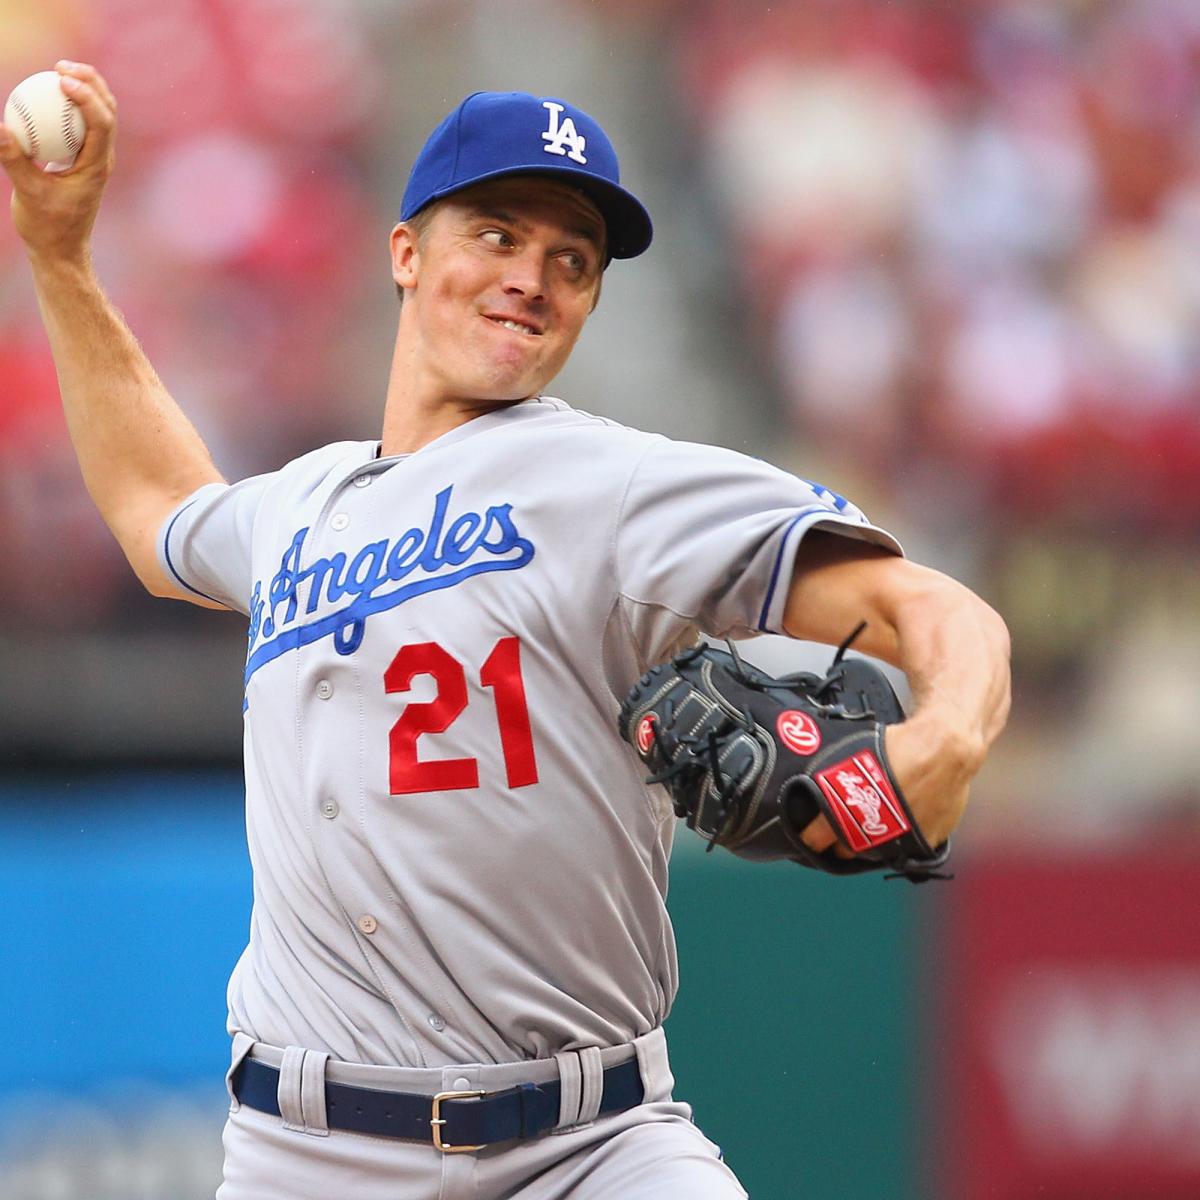 Dodgers 6, Twins 4: Greinke finally gets best of Twins at Target